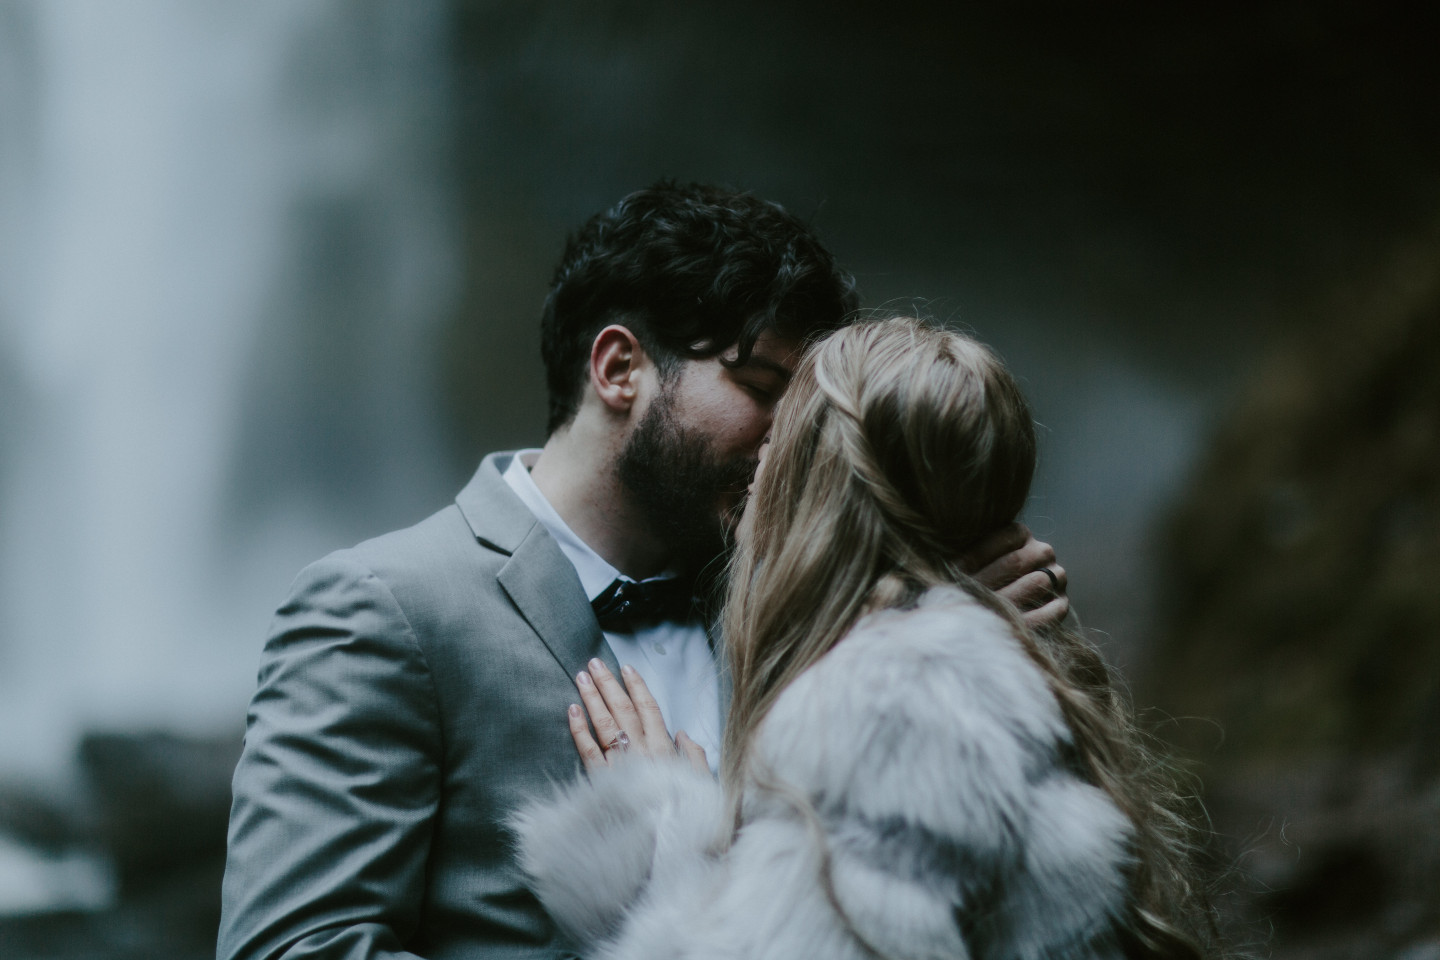 Boris and Tyanna kiss. Adventure elopement in the Columbia River Gorge by Sienna Plus Josh.